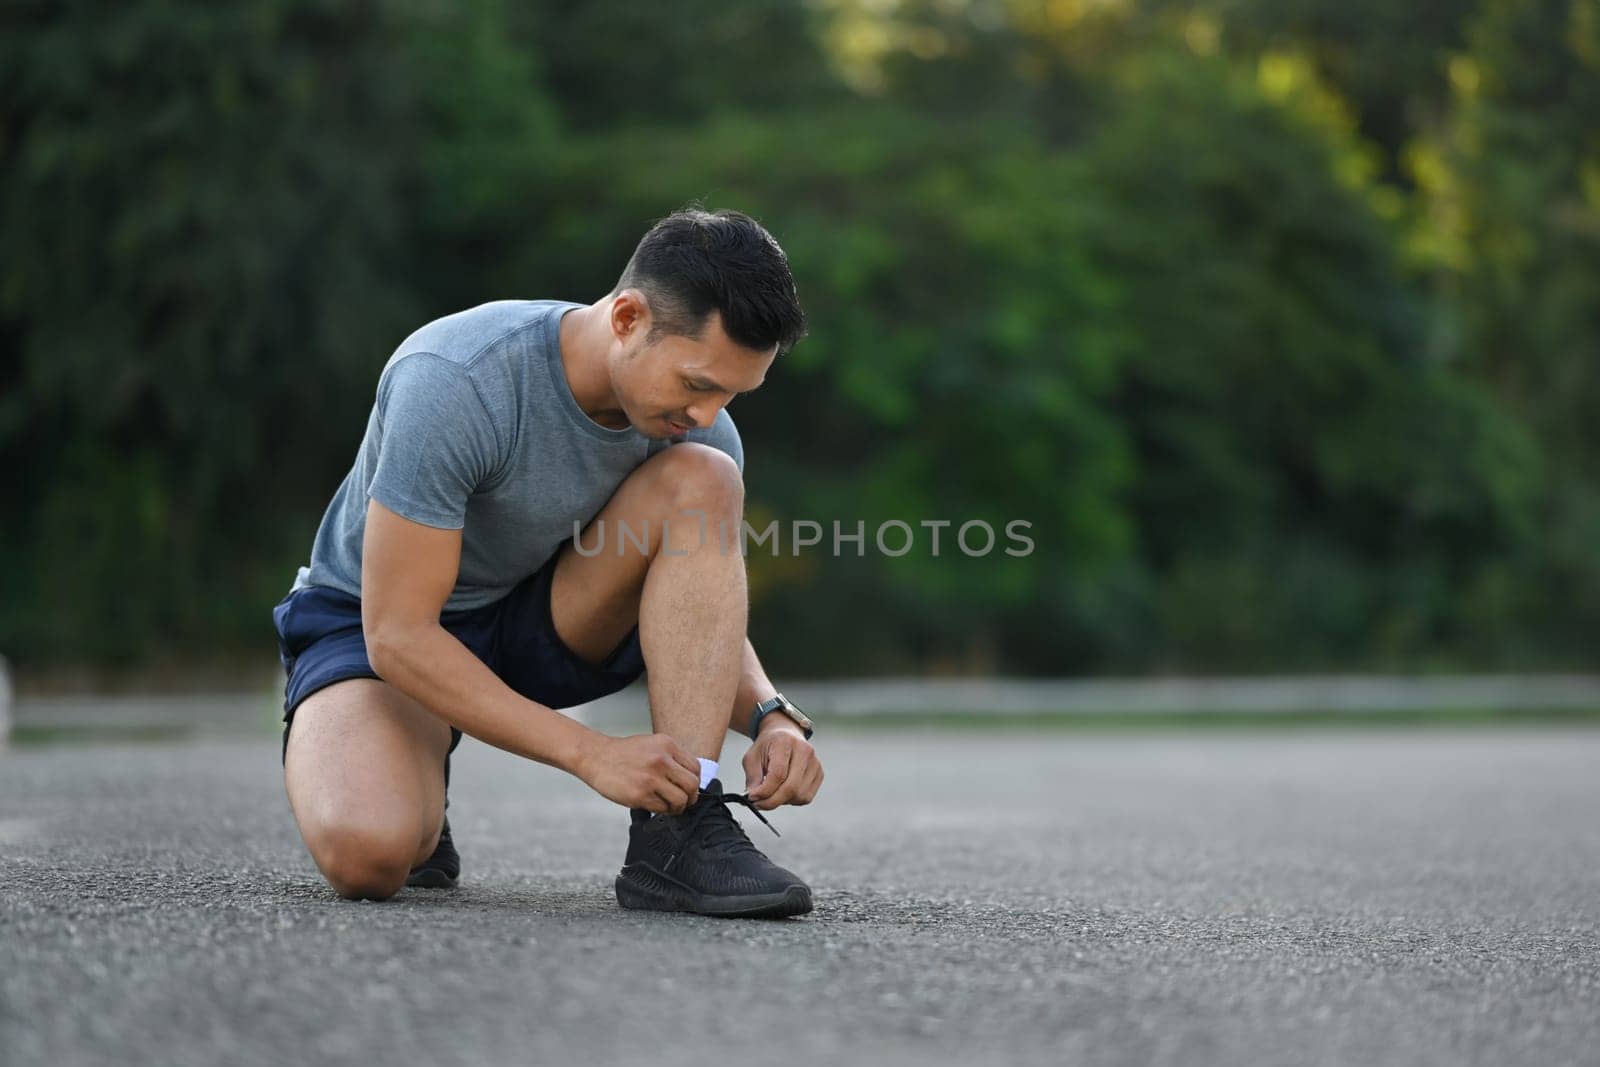 Young sportsman tying shoelace ready for morning jogging. Workout and healthy lifestyle concept by prathanchorruangsak